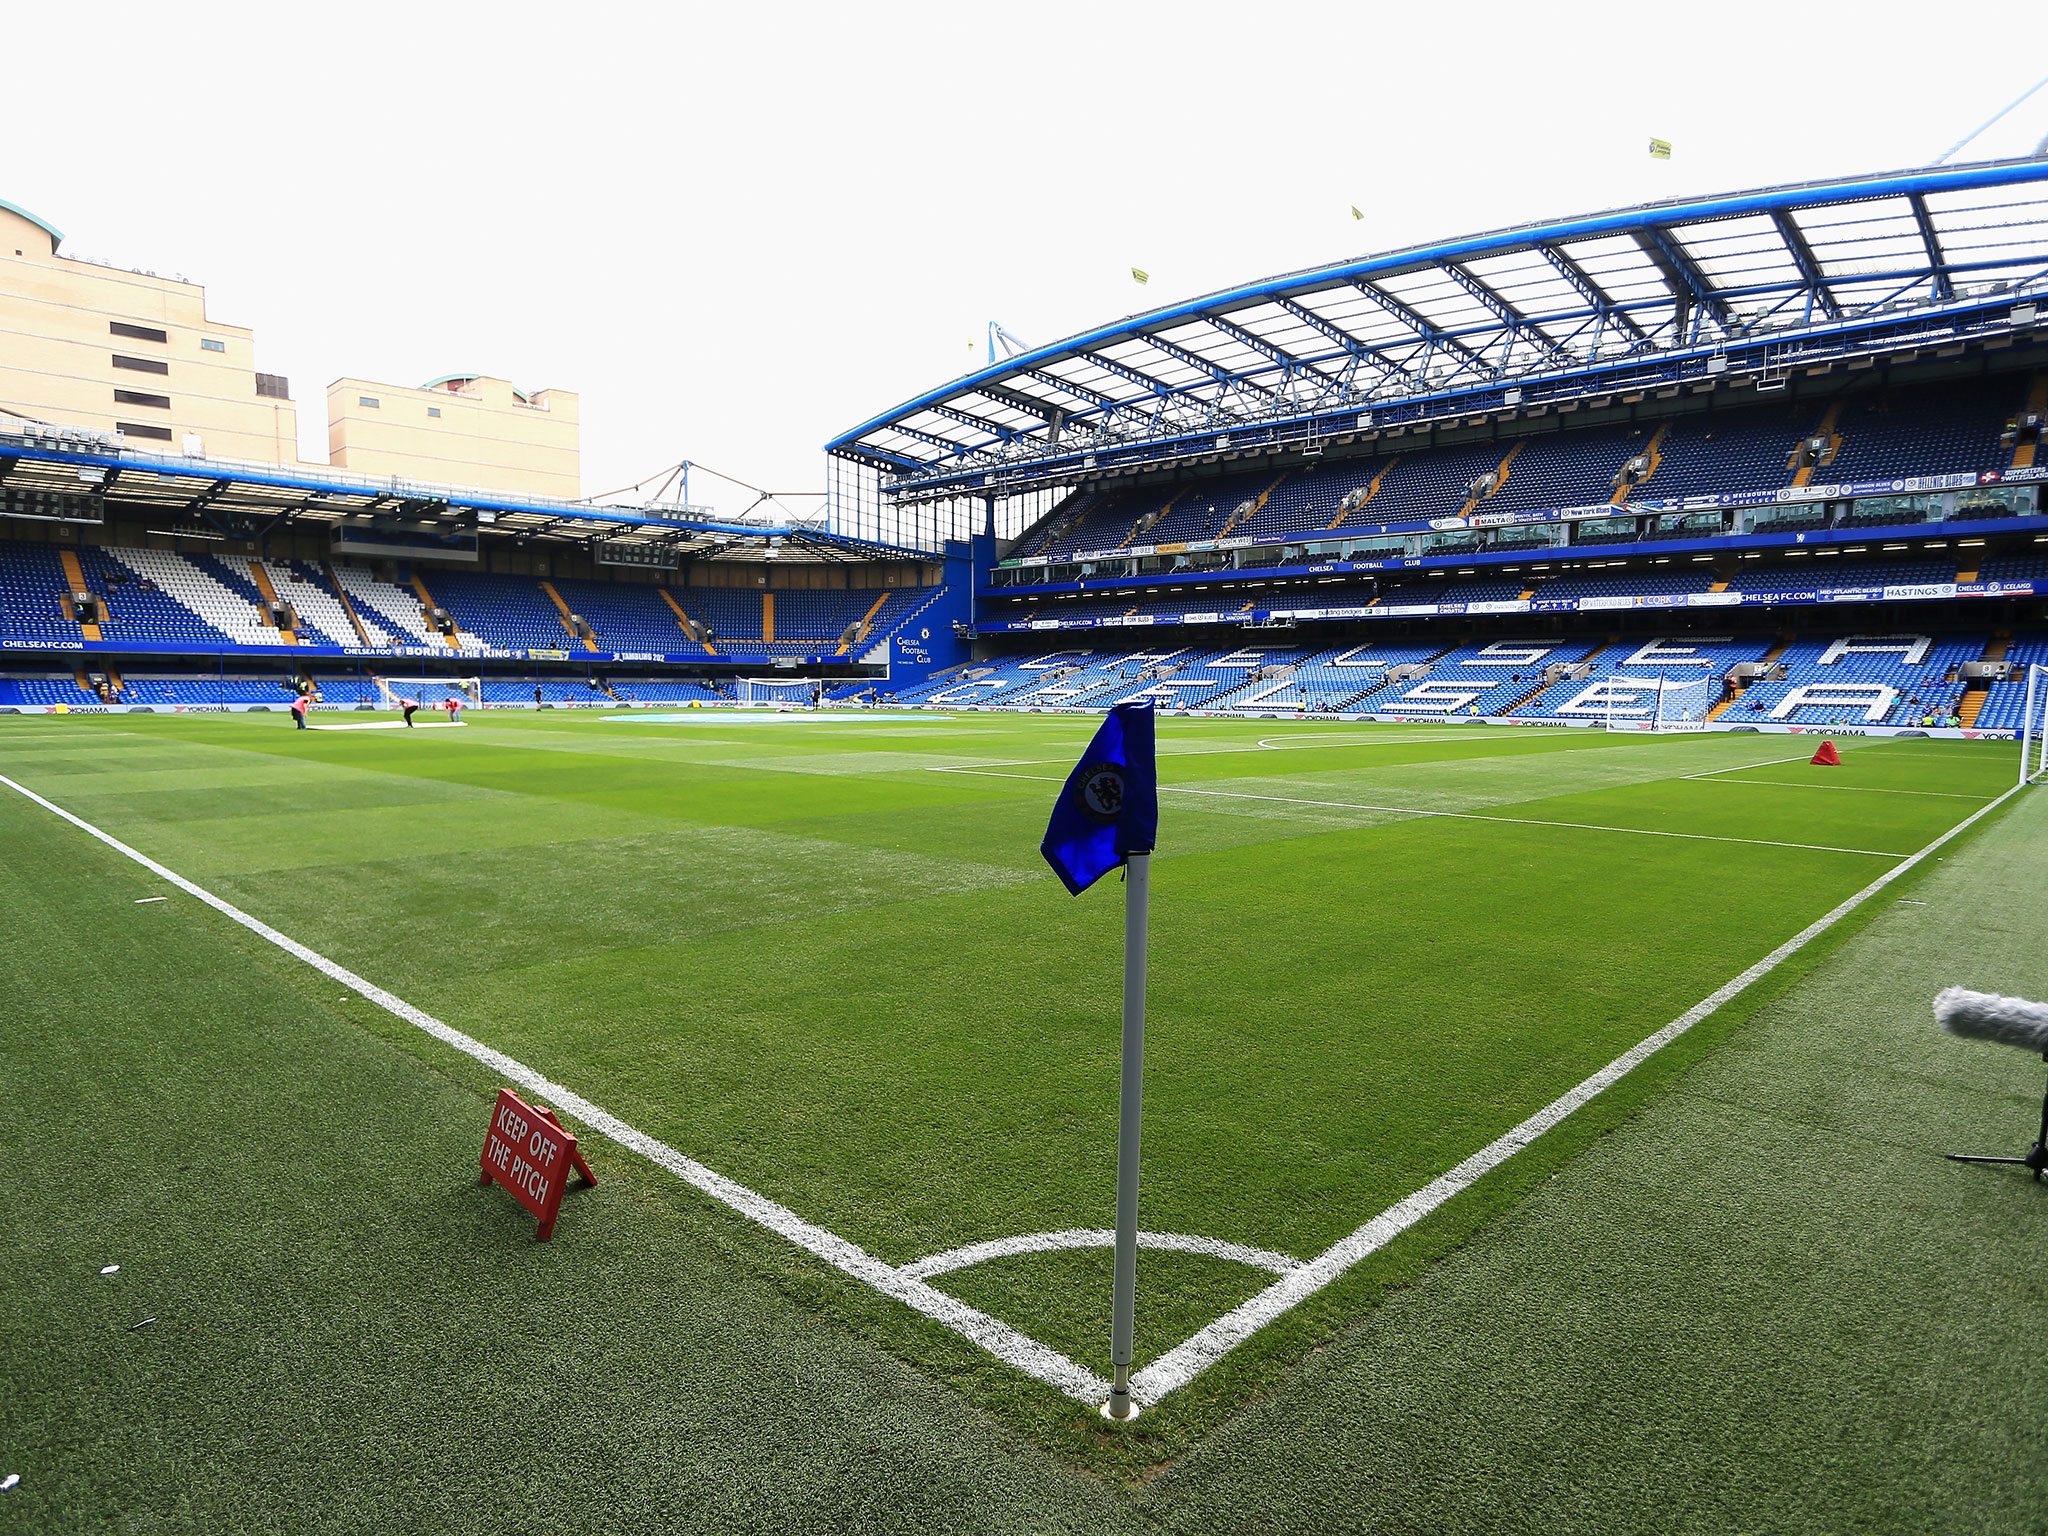 Chelsea VS Watford ( BETTING TIPS, Match Preview & Expert Analysis )